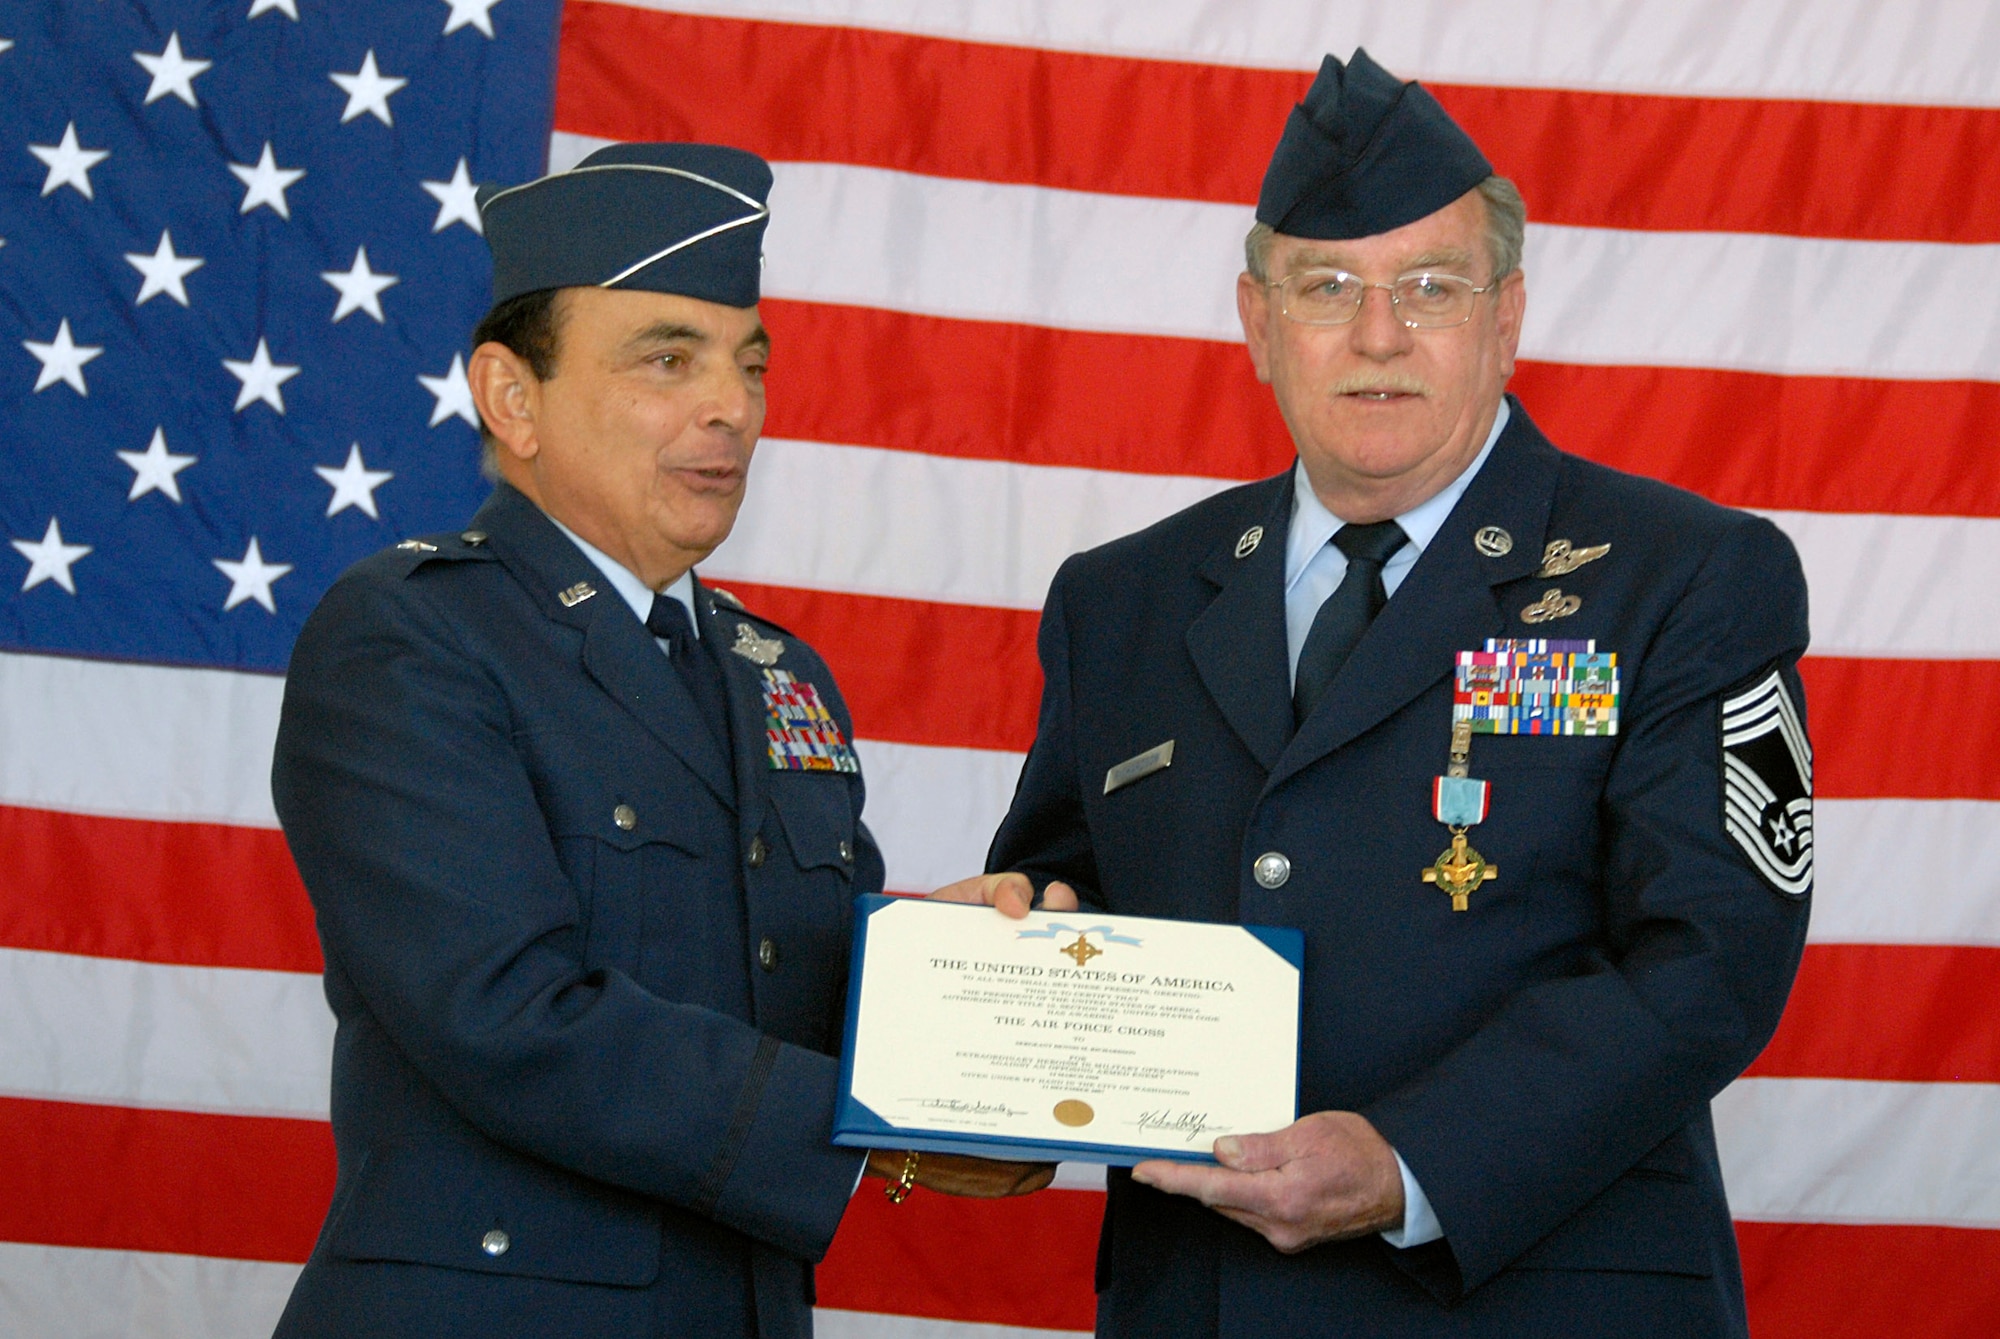 Retired Brig. Gen. Frank Cardile (left) awards retired Chief Master Sgt. Dennis Richardson after presenting him with the Air Force Cross April 5 at the Francis S. Gabreski Airport in New York. Chief Richardson was awarded the Air Force's second-highest honor for valor because of his actions during a March 1968 mission to rescue Airmen in Vietnam. During the mission, Richardson stood exposed in the door of an HH-53 Jolly Green Giant helicopter to fight off enemy forces attempting to board it. (U.S. Air Force photo/Staff Sgt. David J. Murphy) 